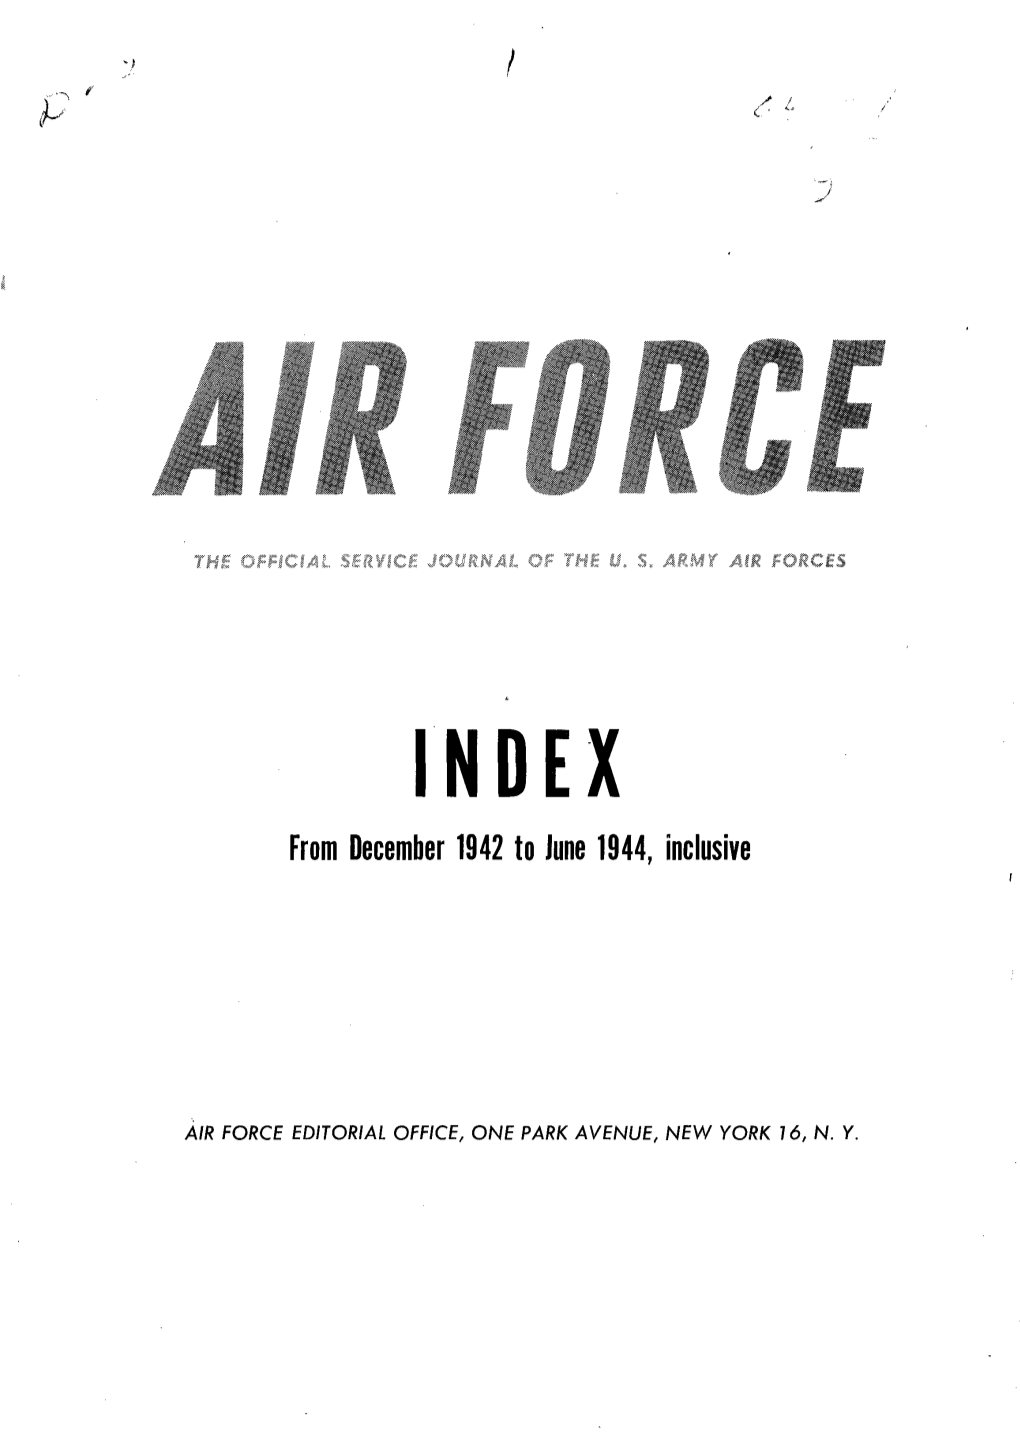 Air Force the Official Service Journal